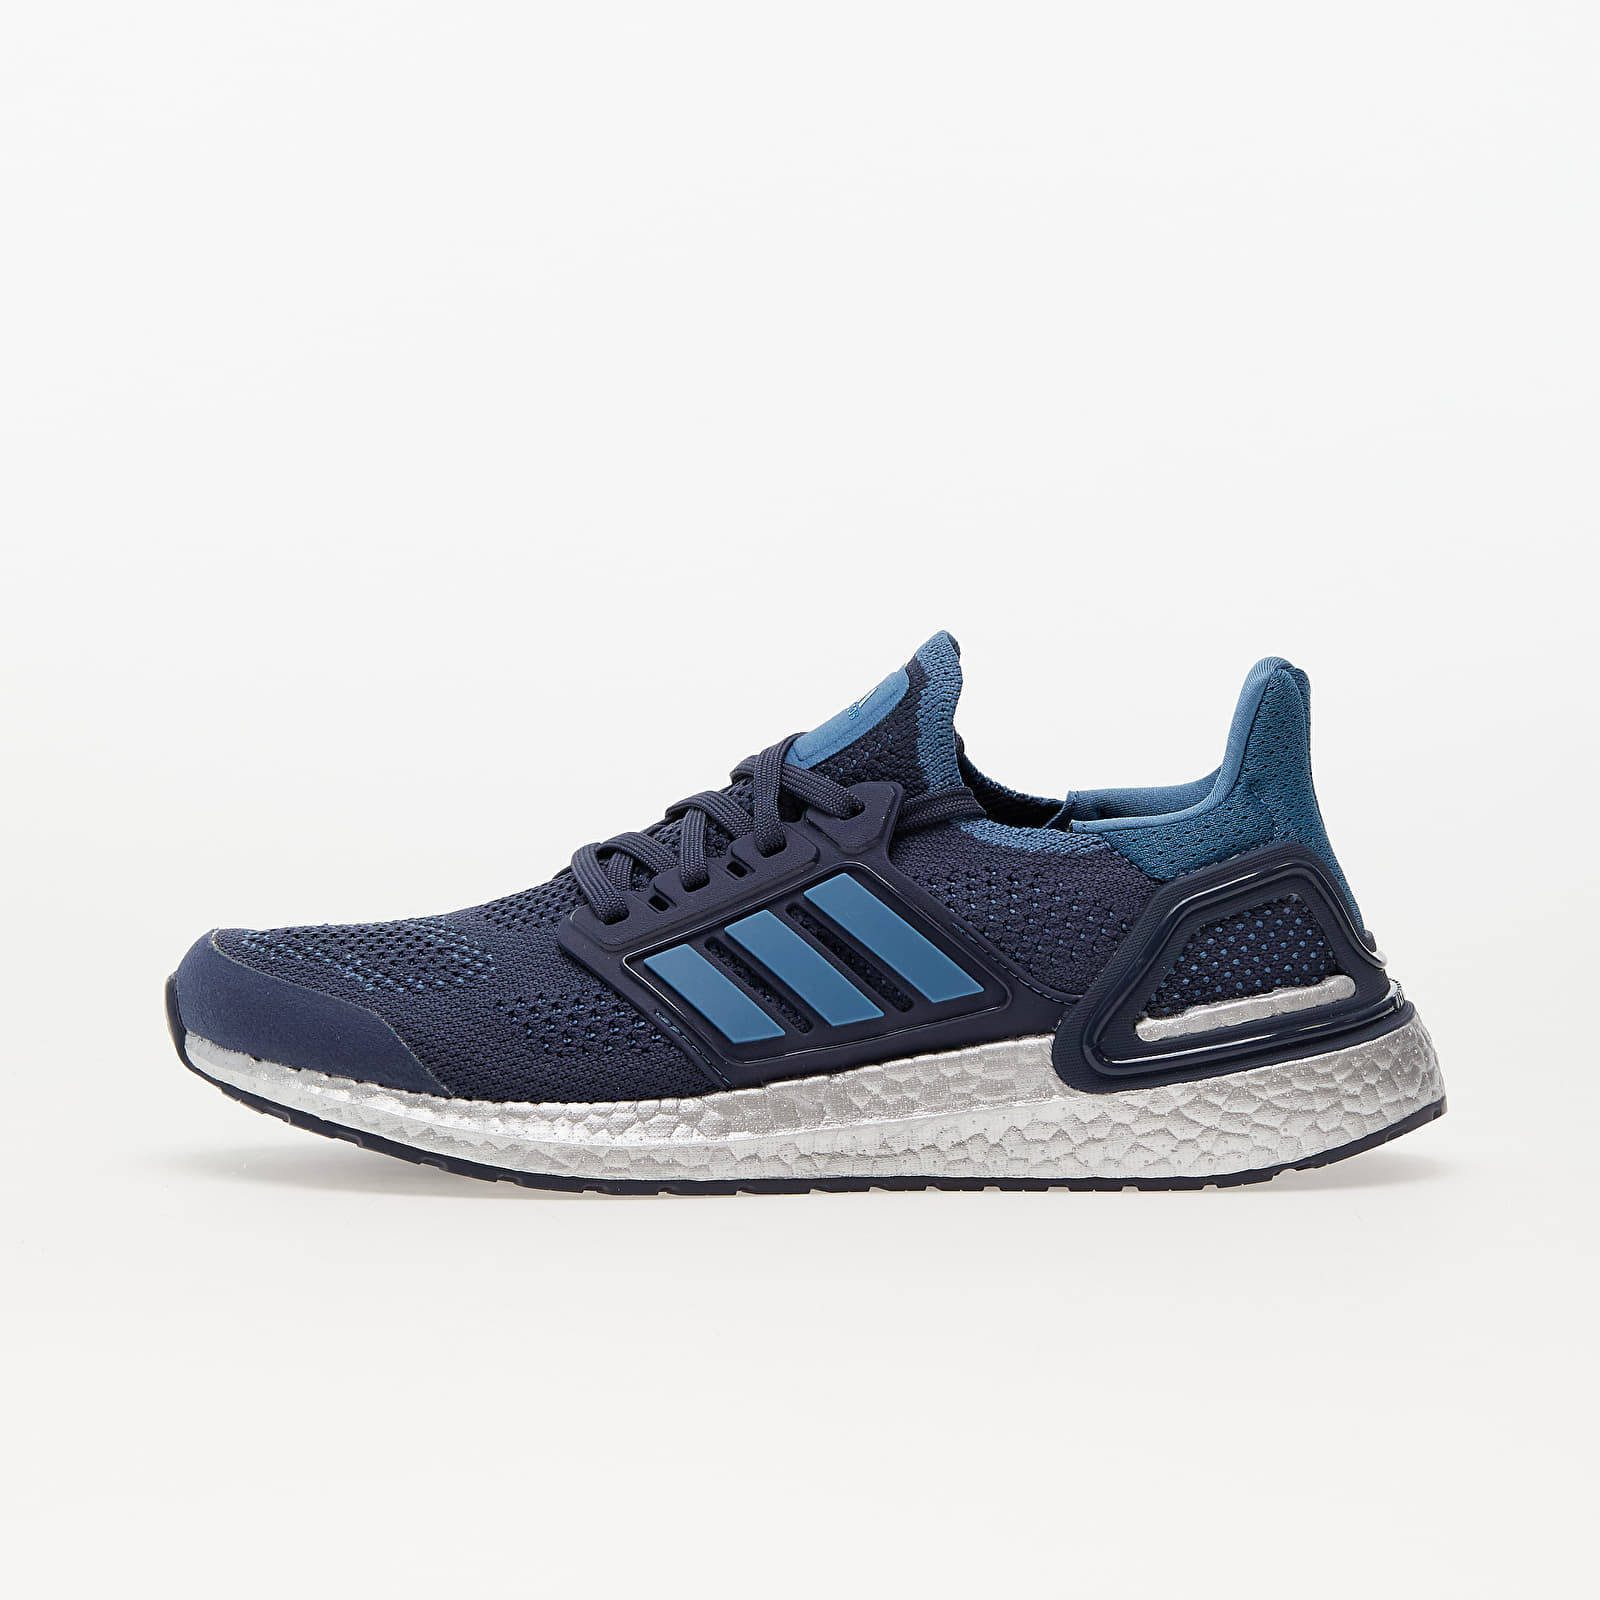 Men's shoes adidas UltraBOOST 19.5 Dna Shale Navy/ Alter Navy/ Pul Blue